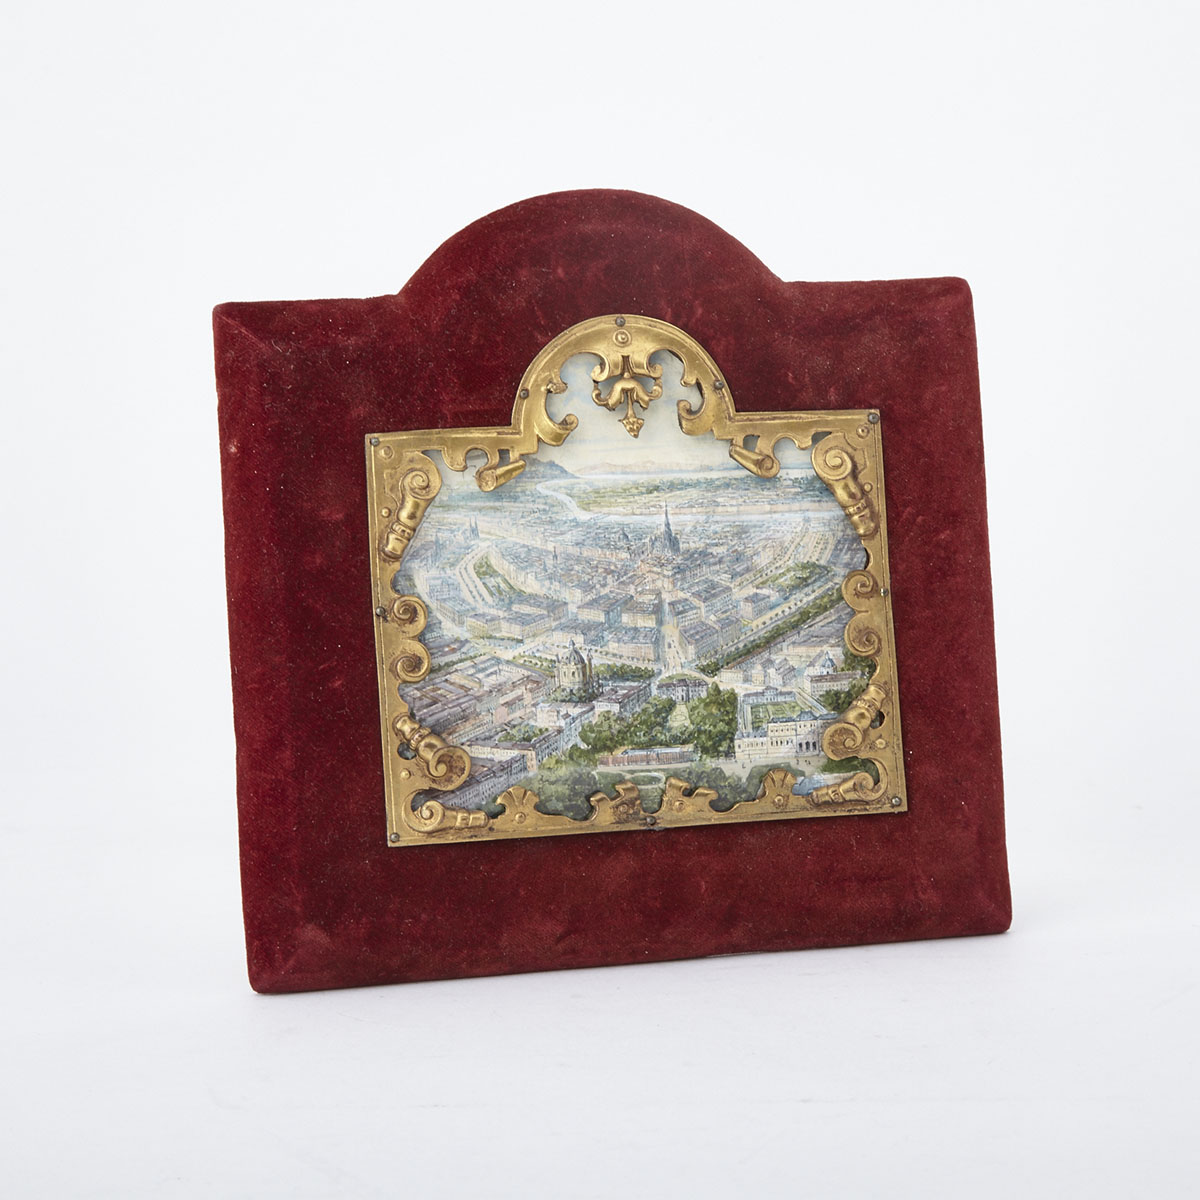 Miniature Topographical View of Vienna, circa 1860